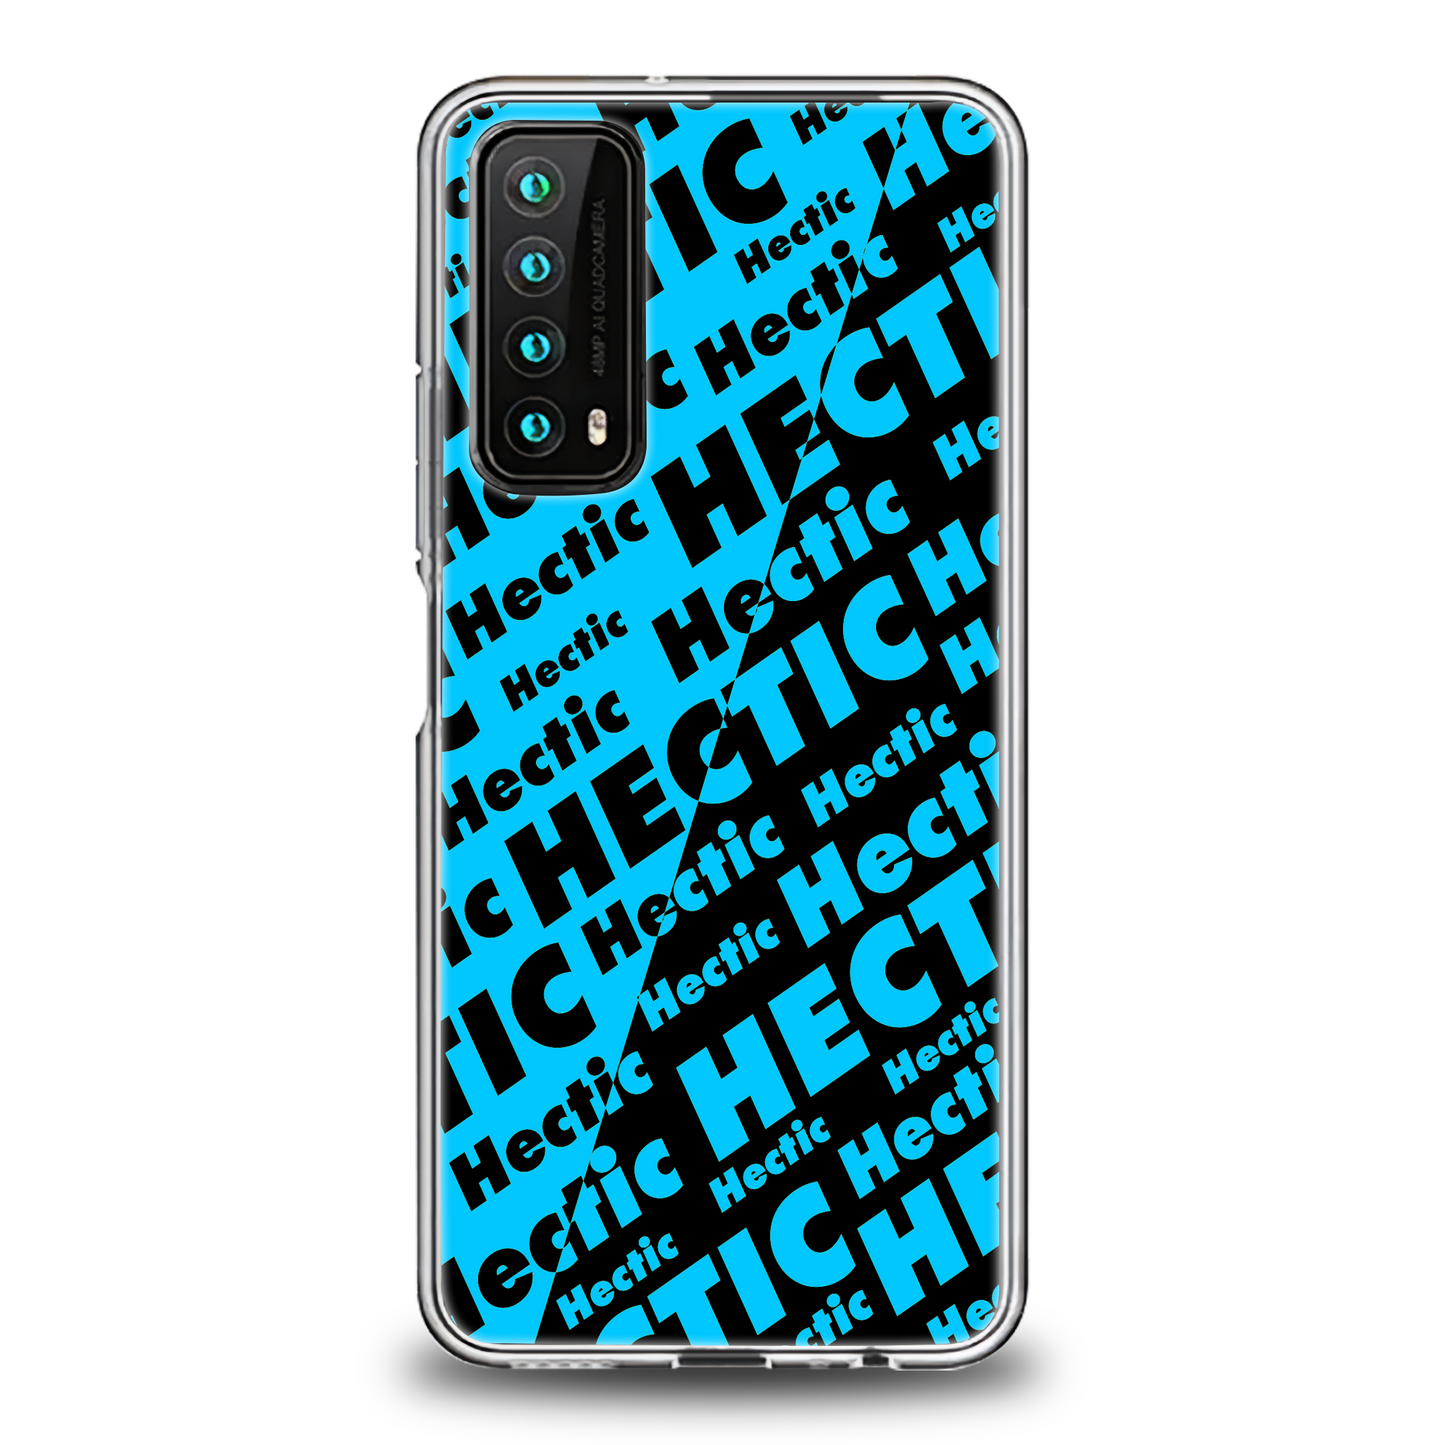 Hectic Phone Case - Huawei